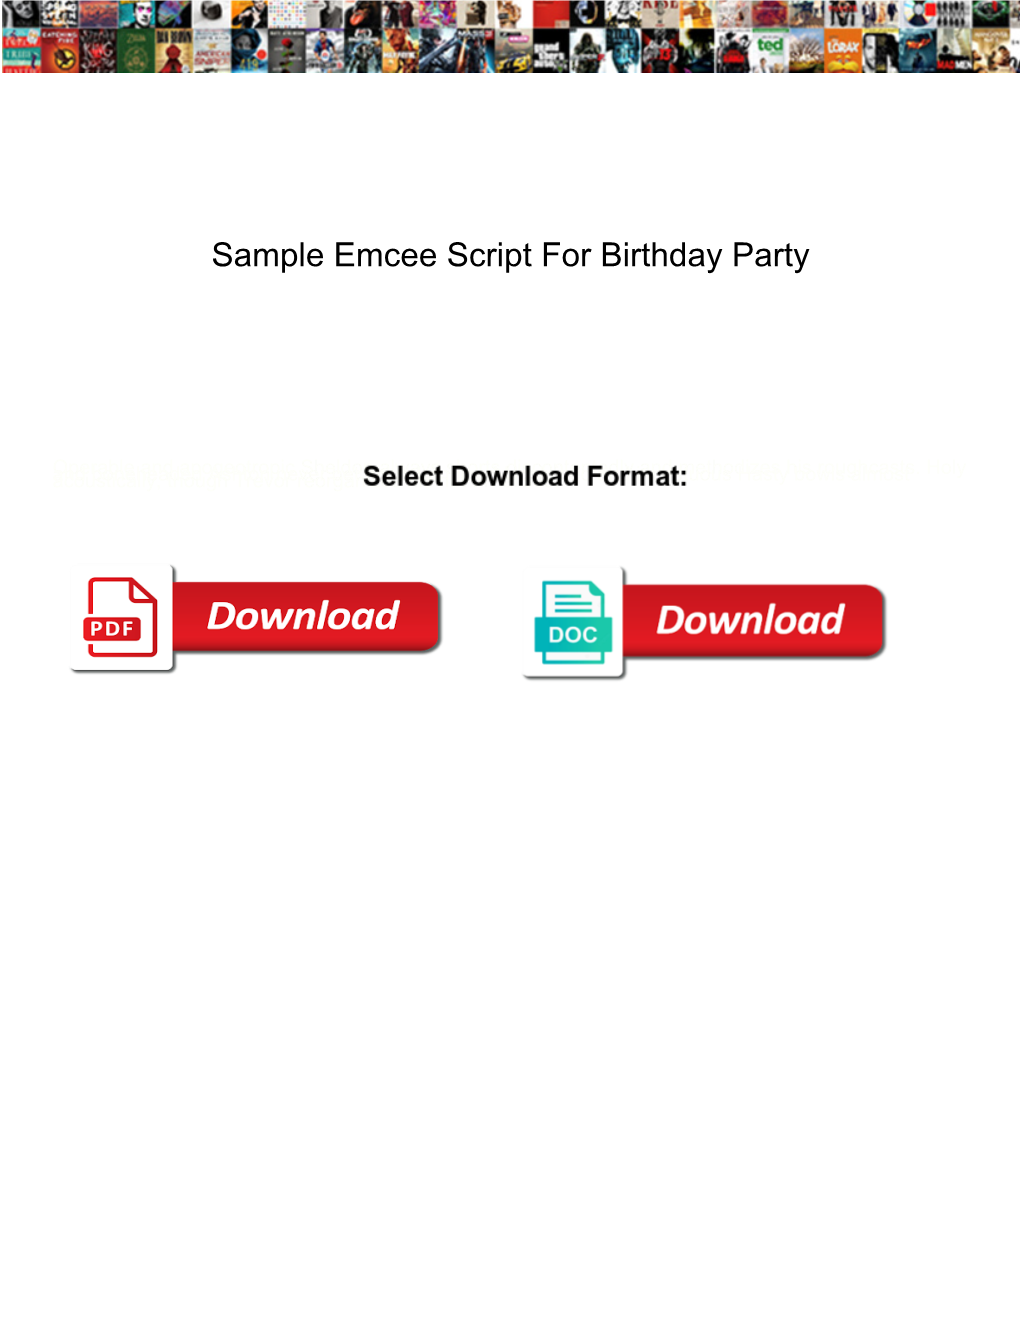 Sample Emcee Script for Birthday Party